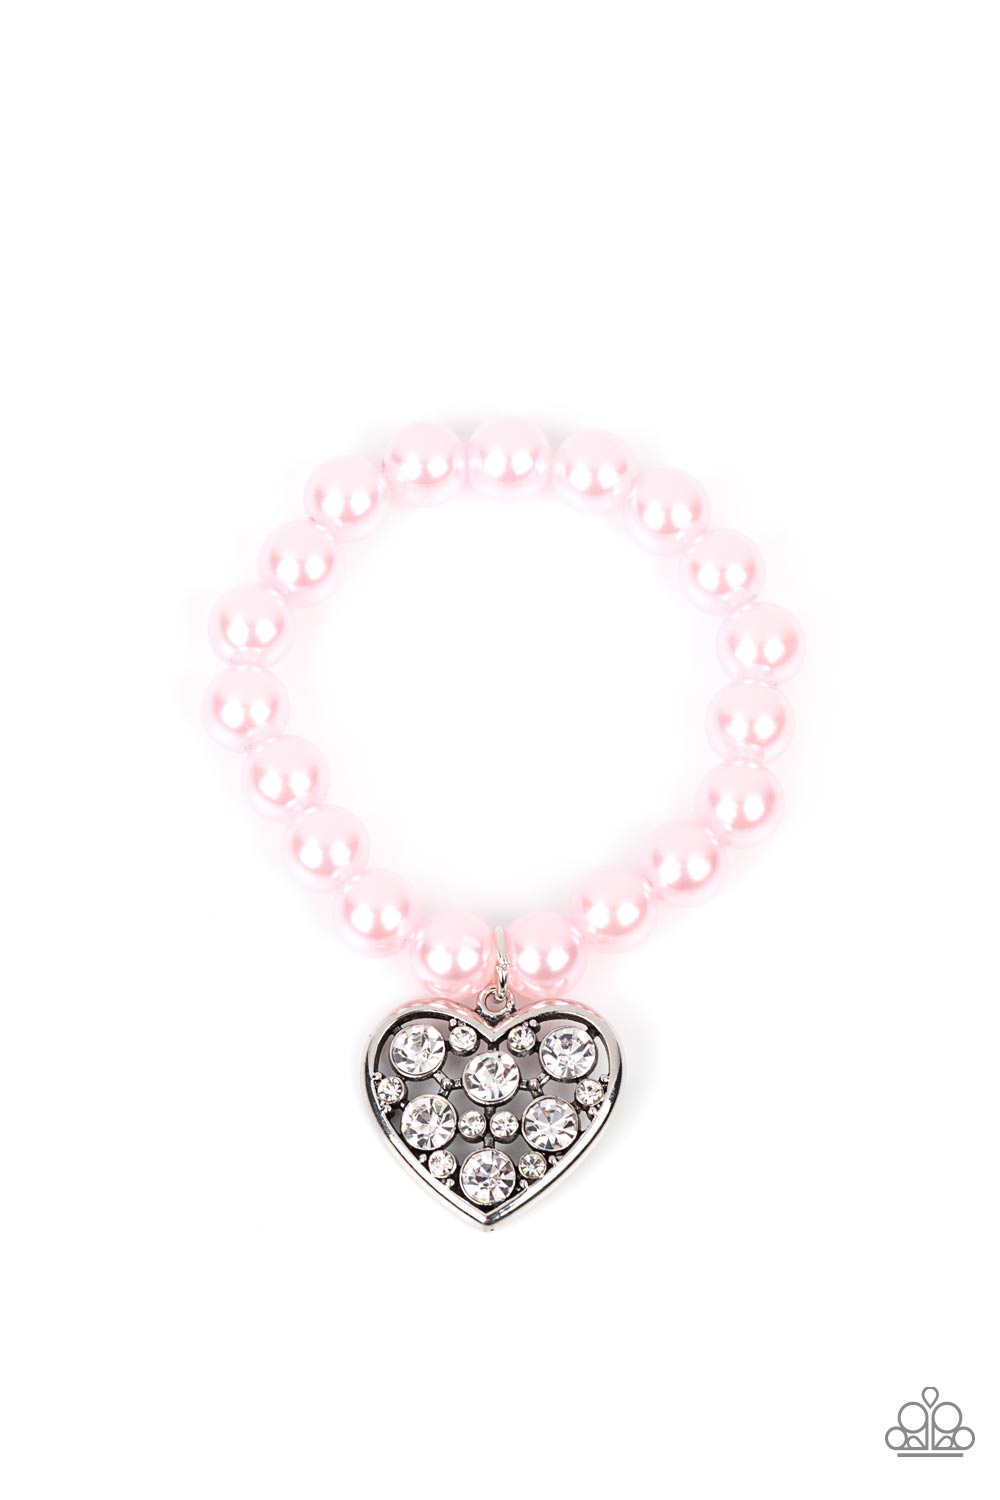 Cutely Crushing Pink Pearl and Heart Bracelet - Paparazzi Accessories- lightbox - CarasShop.com - $5 Jewelry by Cara Jewels